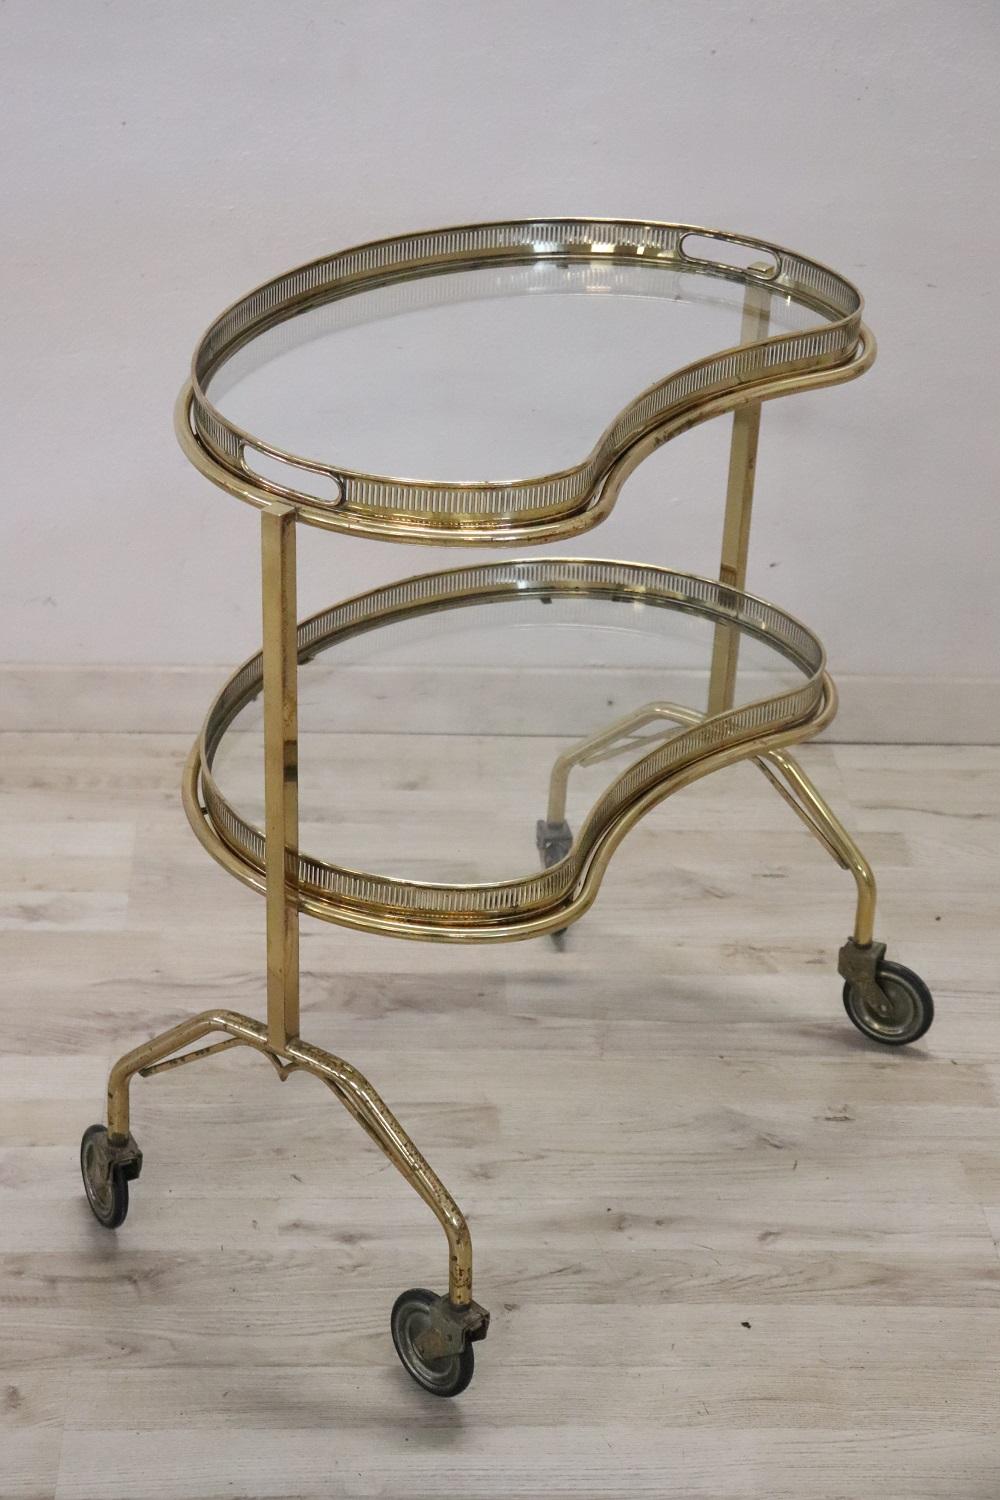 Rare bar cart Italian 1980s, it is made of golden brass and glass. The brass is finely worked. Comfortable wheels they allow easy movement. Equipped with two glass top, the upper top is equipped with handles and can be used as a tray to serve